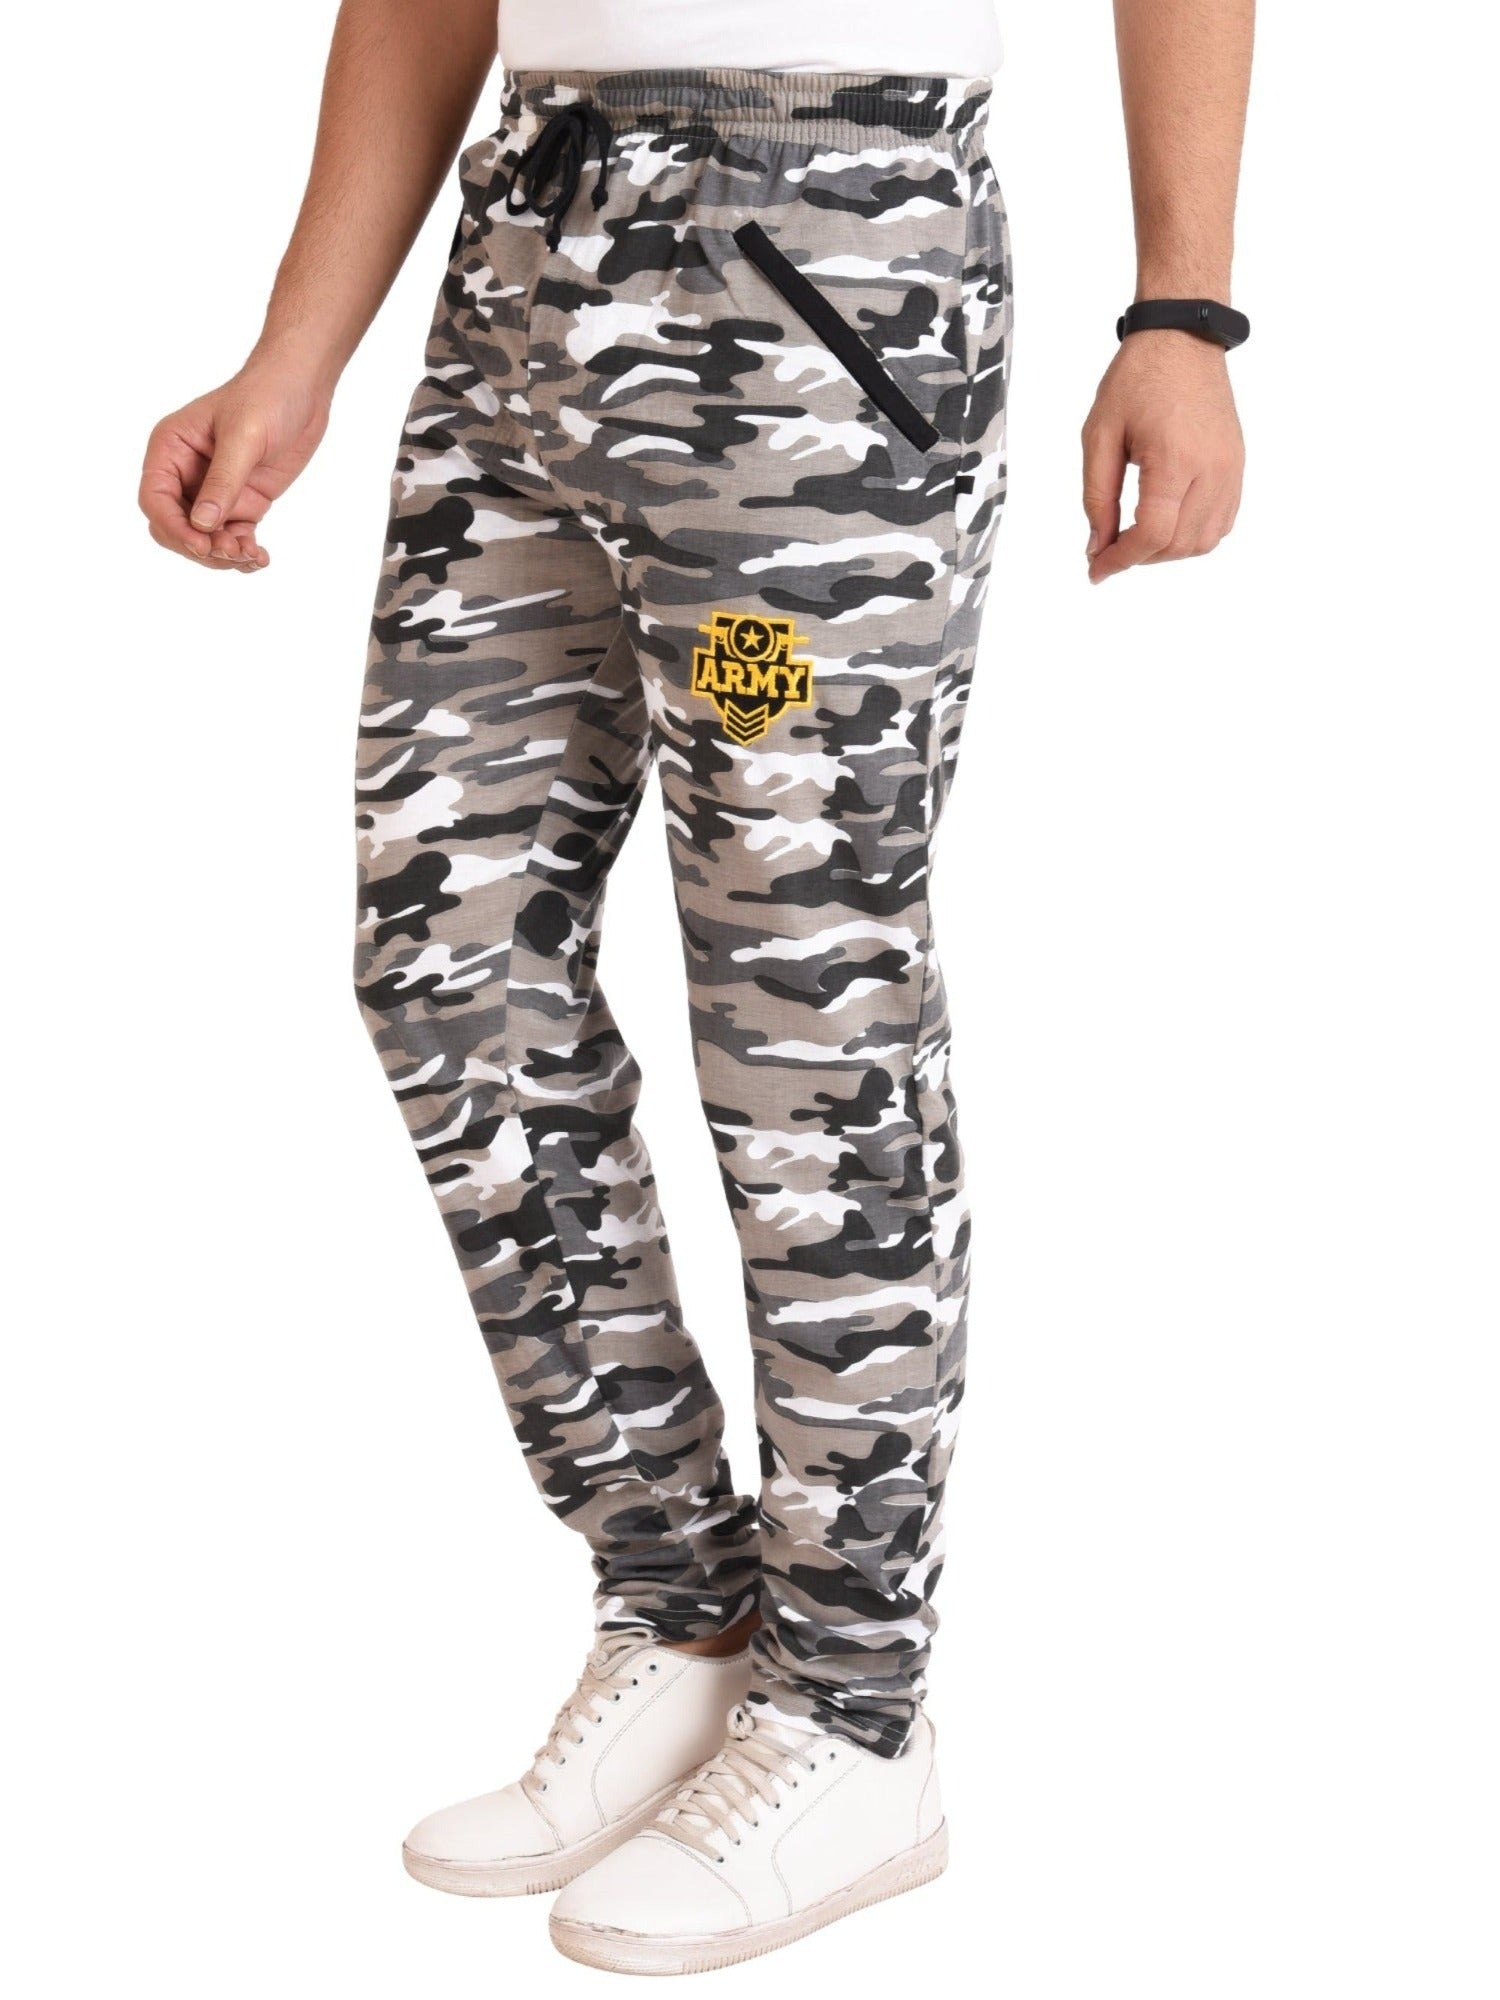 Mens Cotton Camouflage Track Pant  GREYWHITE  size from M TO 5XL   Neo Garments